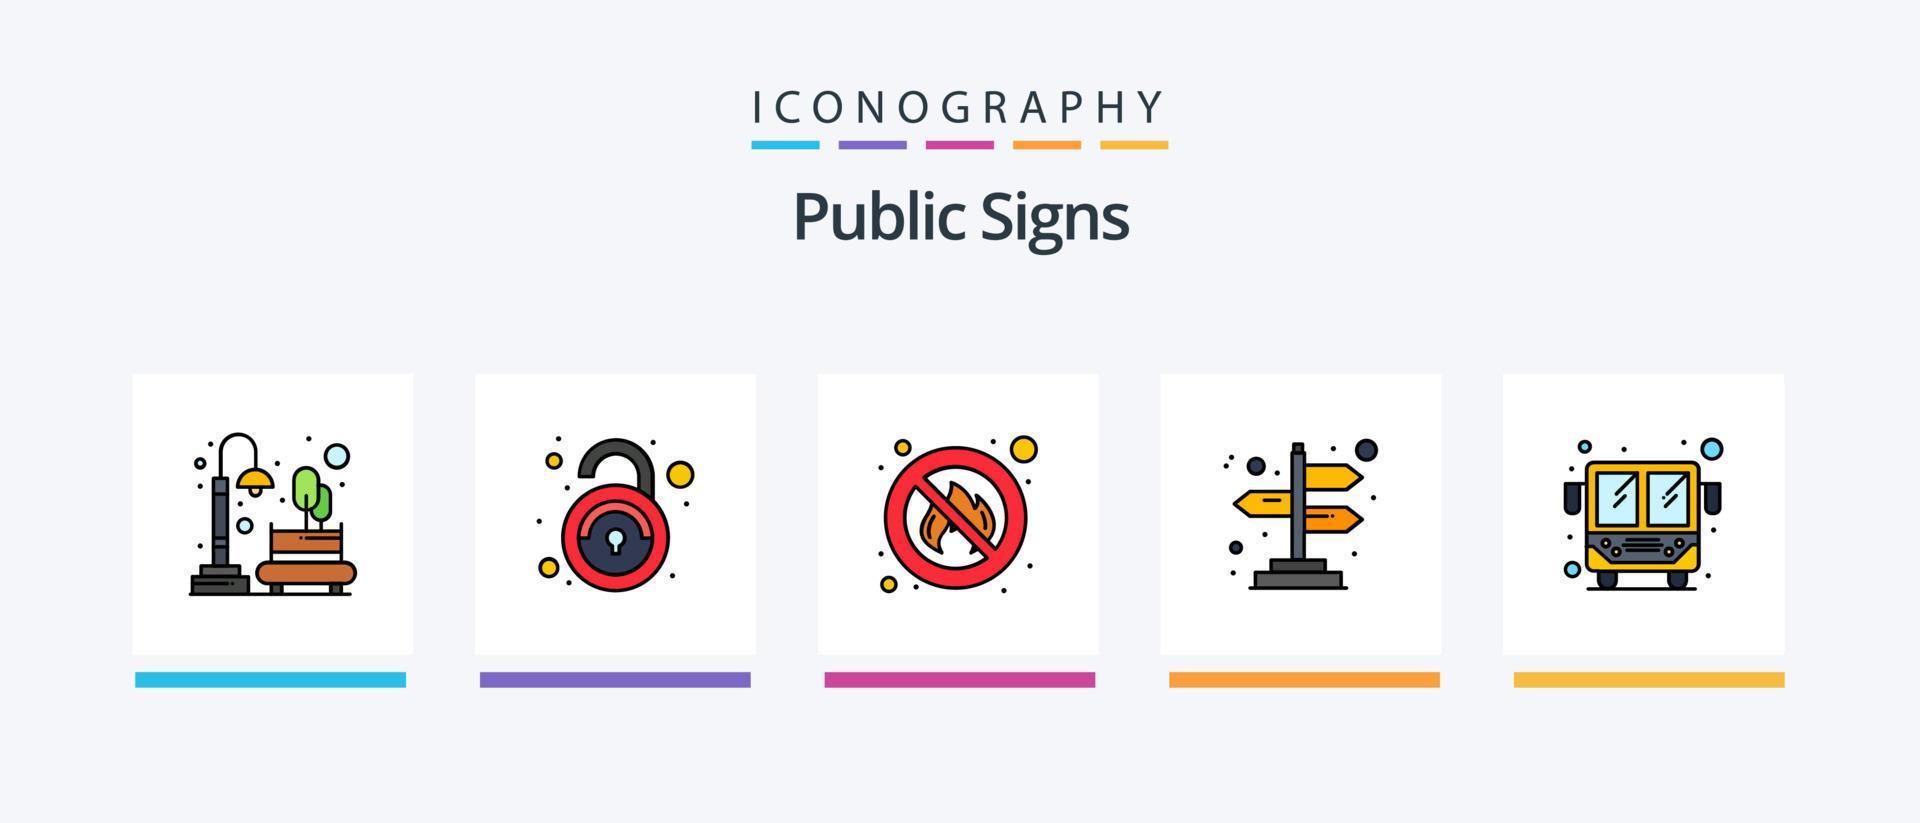 Public Signs Line Filled 5 Icon Pack Including recycle. garbage. unlock. dustbin. cross. Creative Icons Design vector